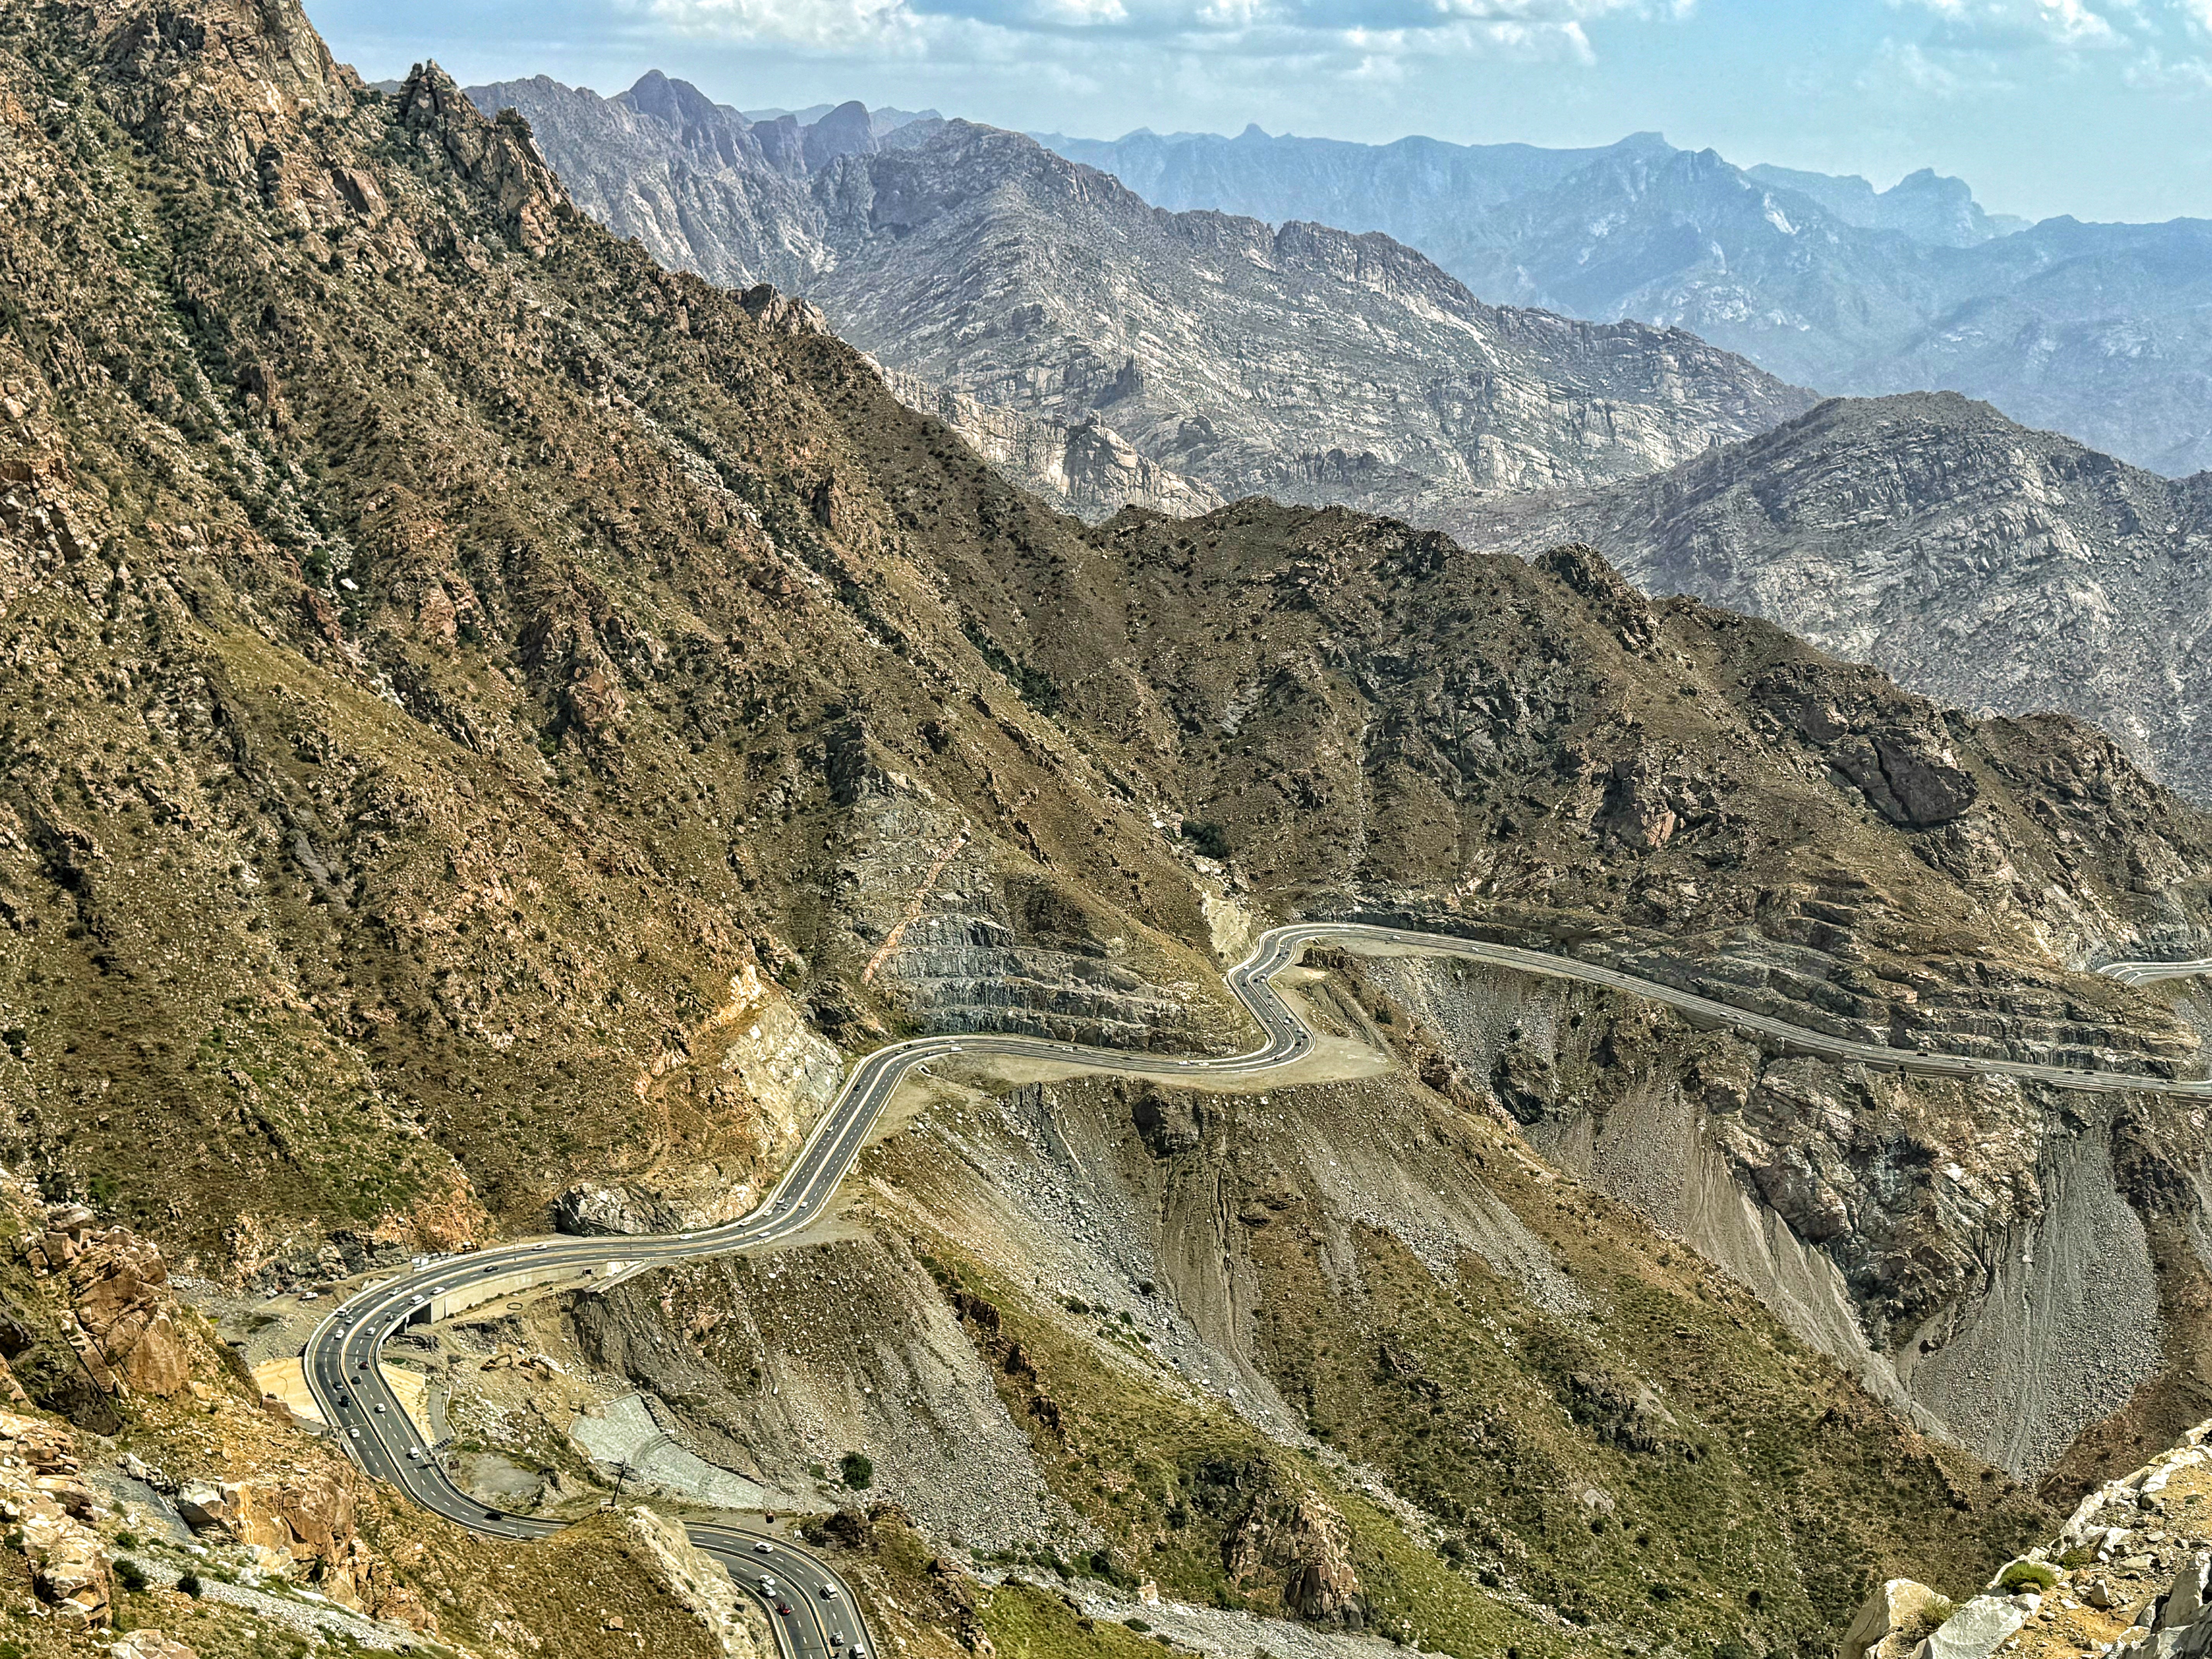 The winding road from Taif to Jeddah, passing Mecca on the way